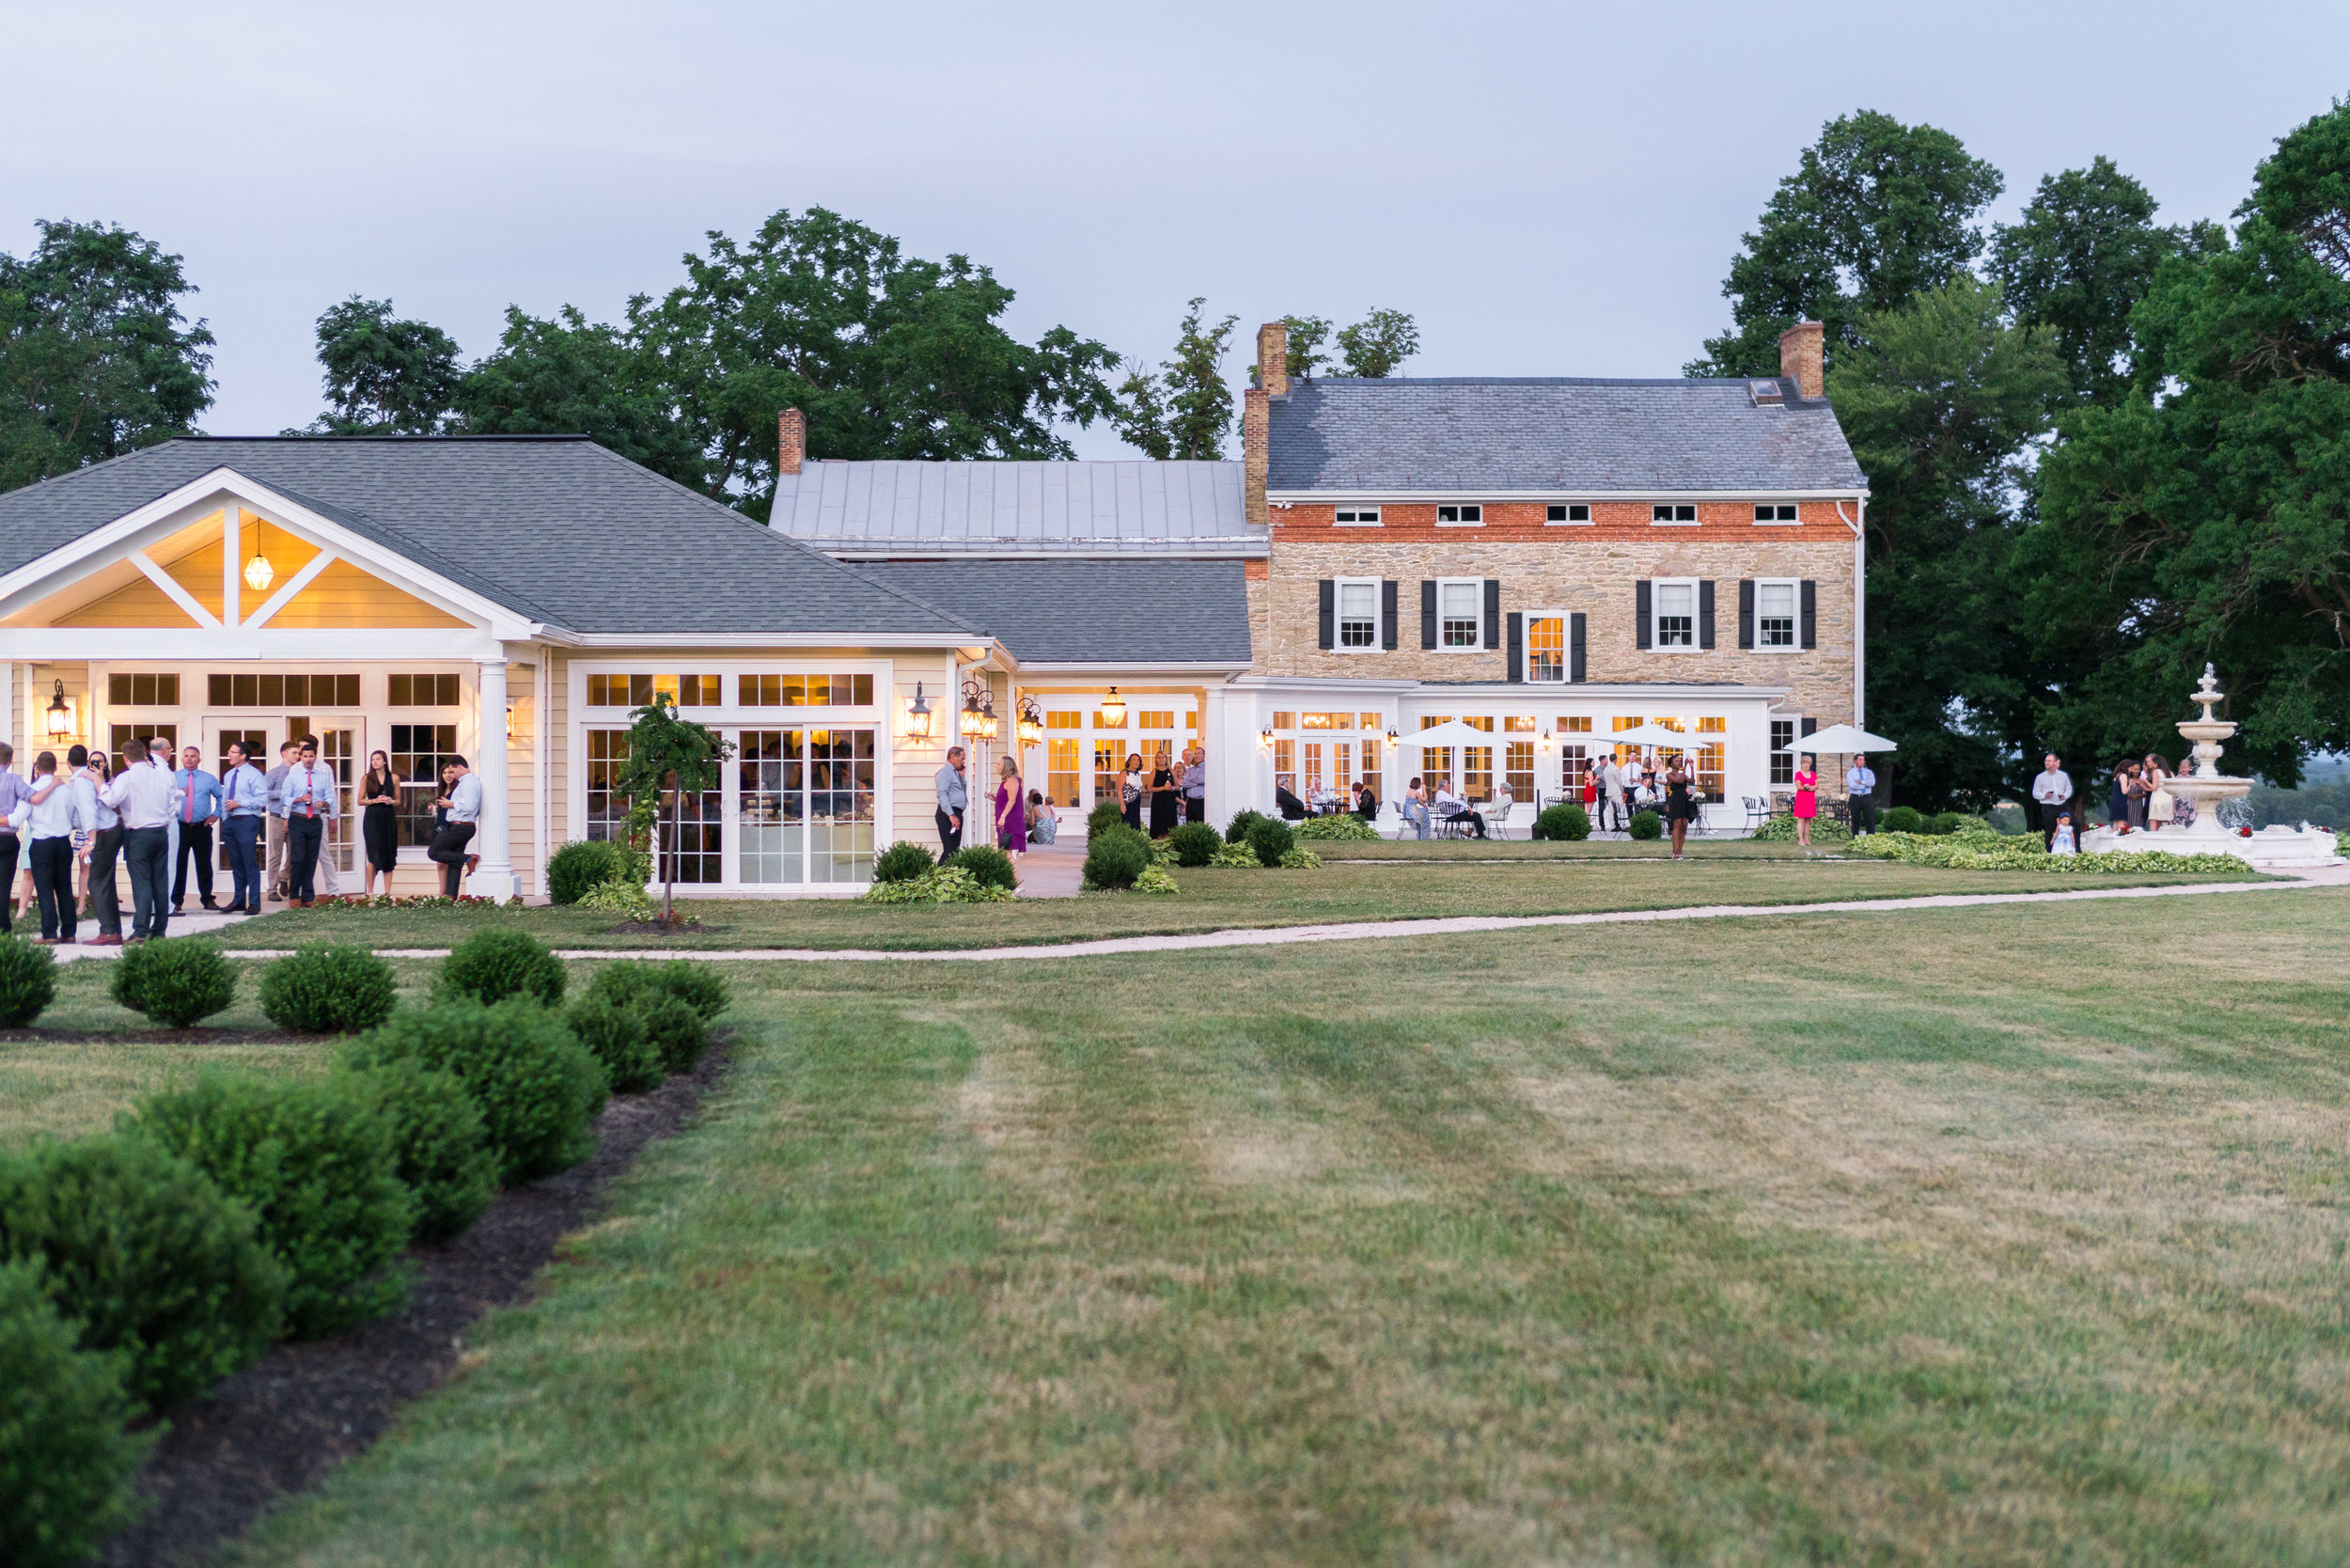 Sunset reception photos at Springfield Manor Winery and Distillery